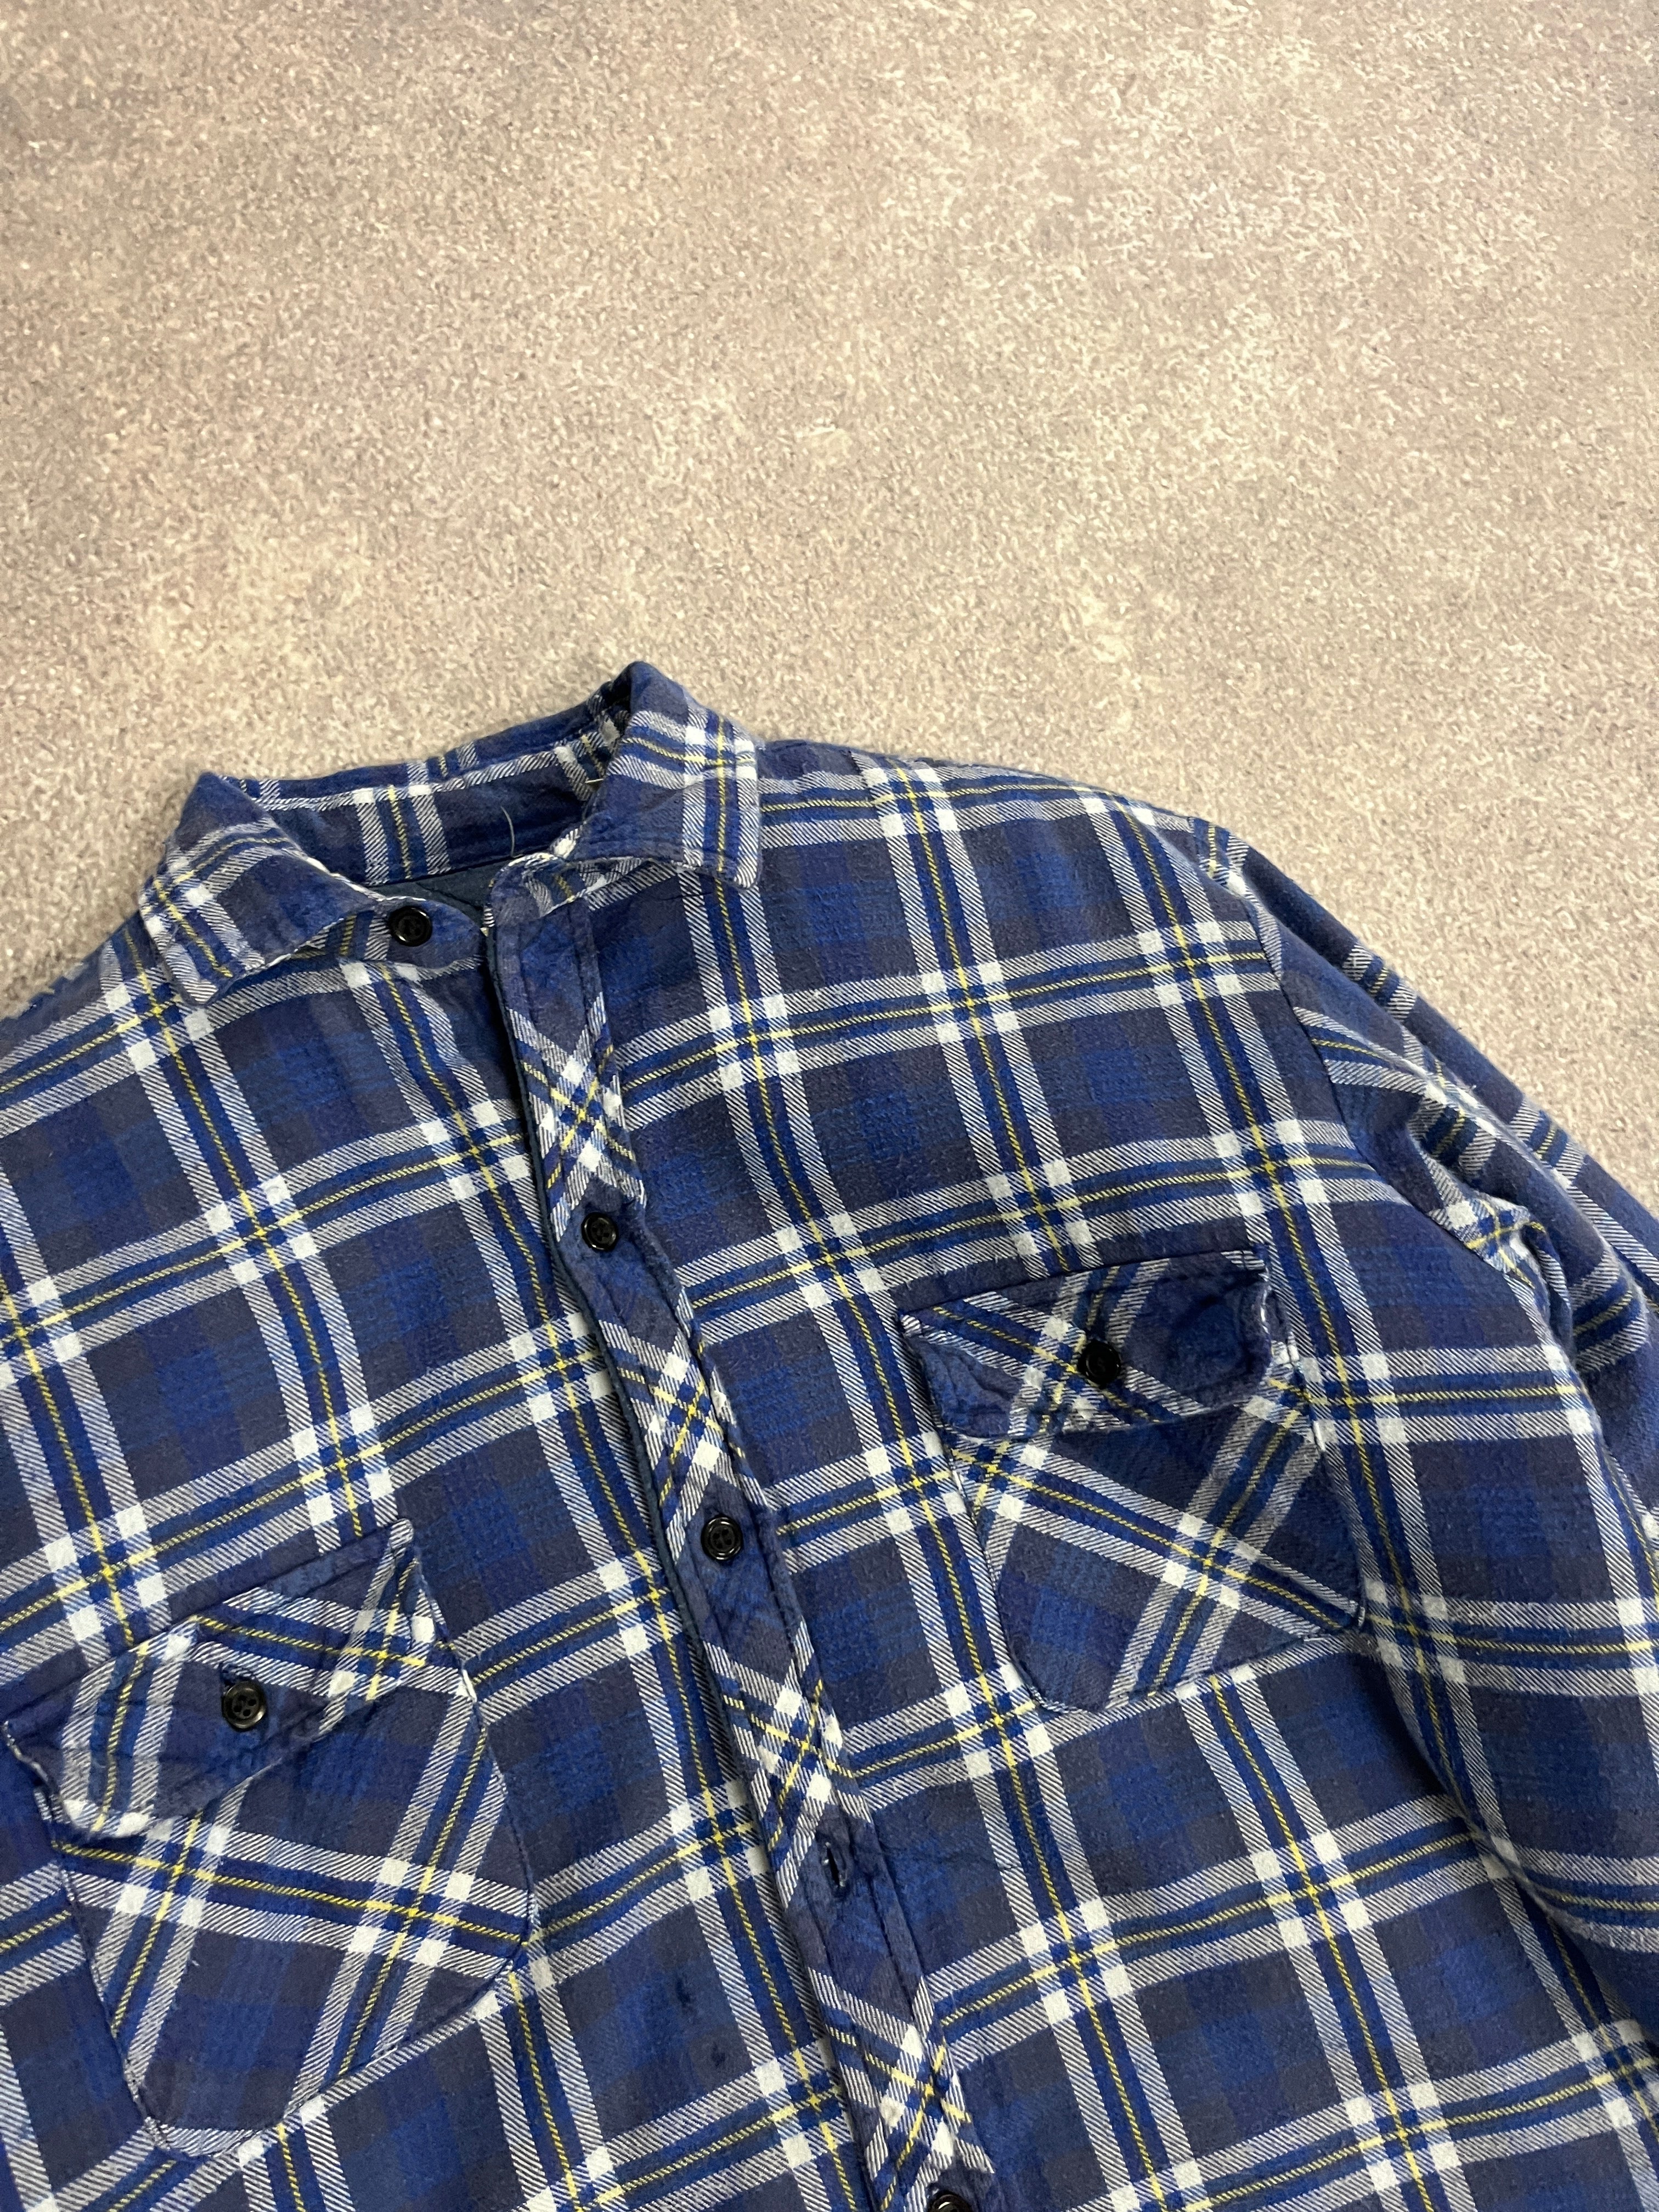 Vintage Lined Shirt Blue // X-Small - RHAGHOUSE VINTAGE